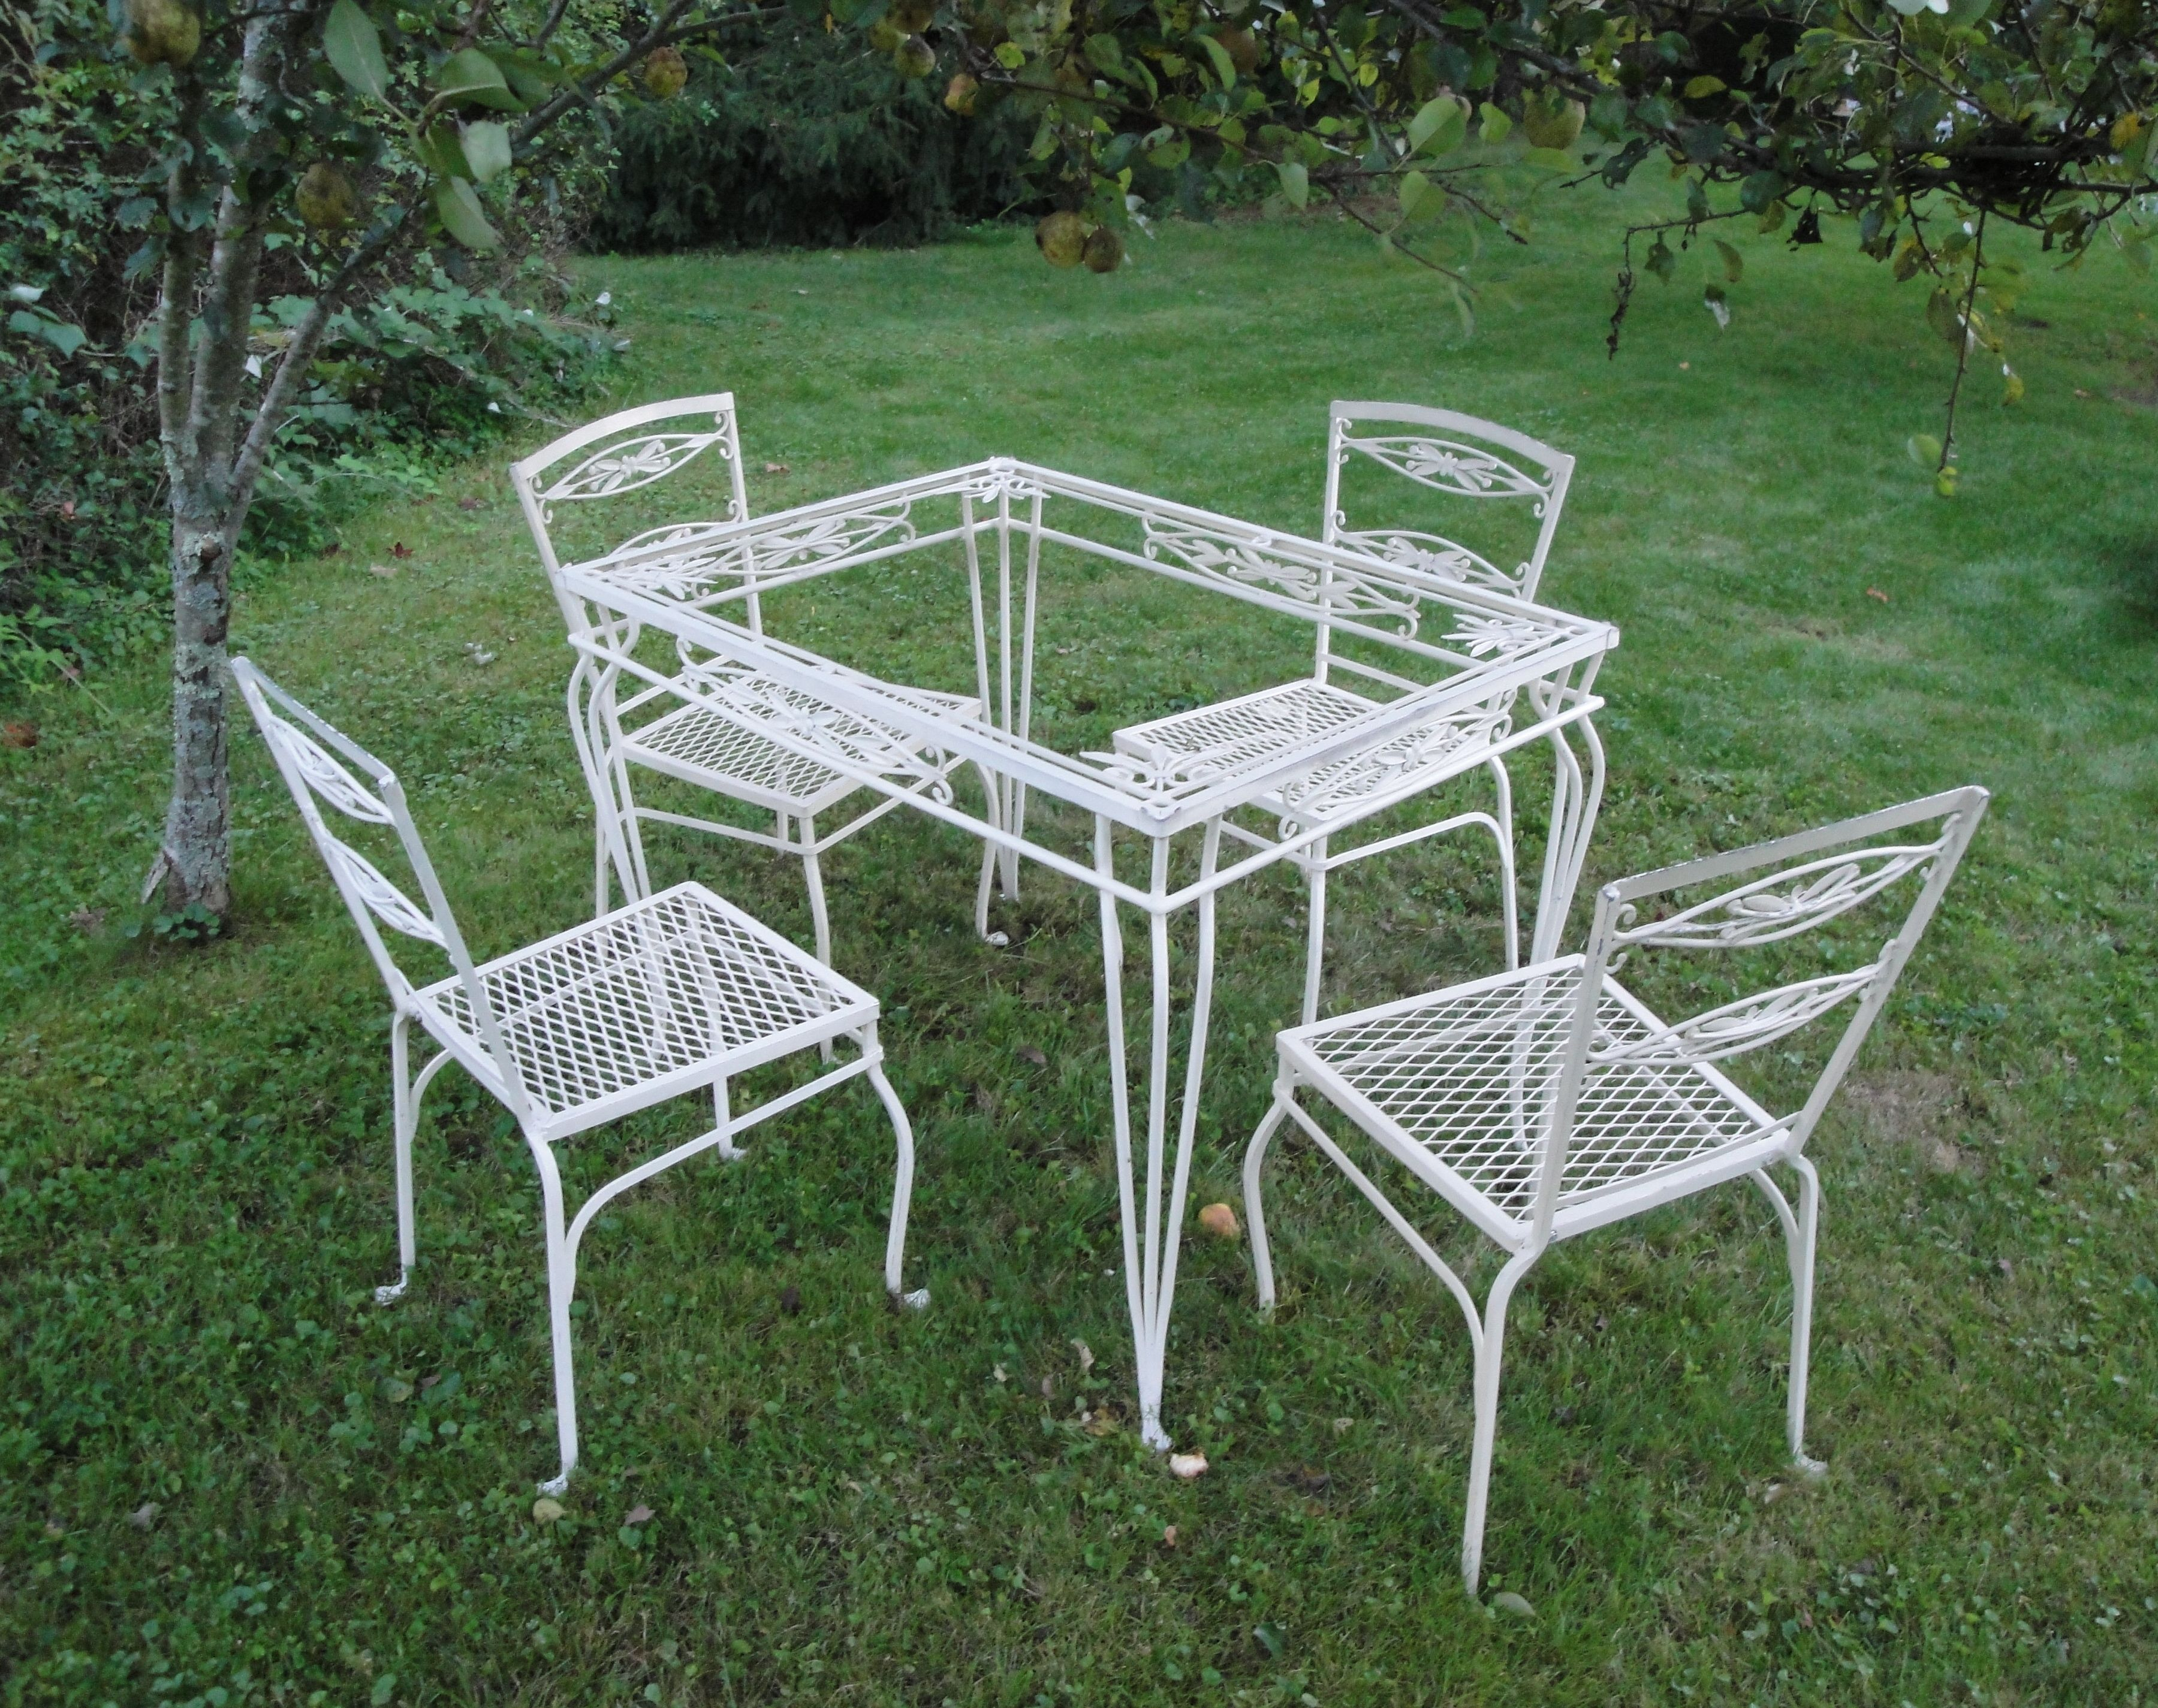 A Girl Can Dream Metal Patio Chairs Wrought Iron Patio inside sizing 3600 X 2850